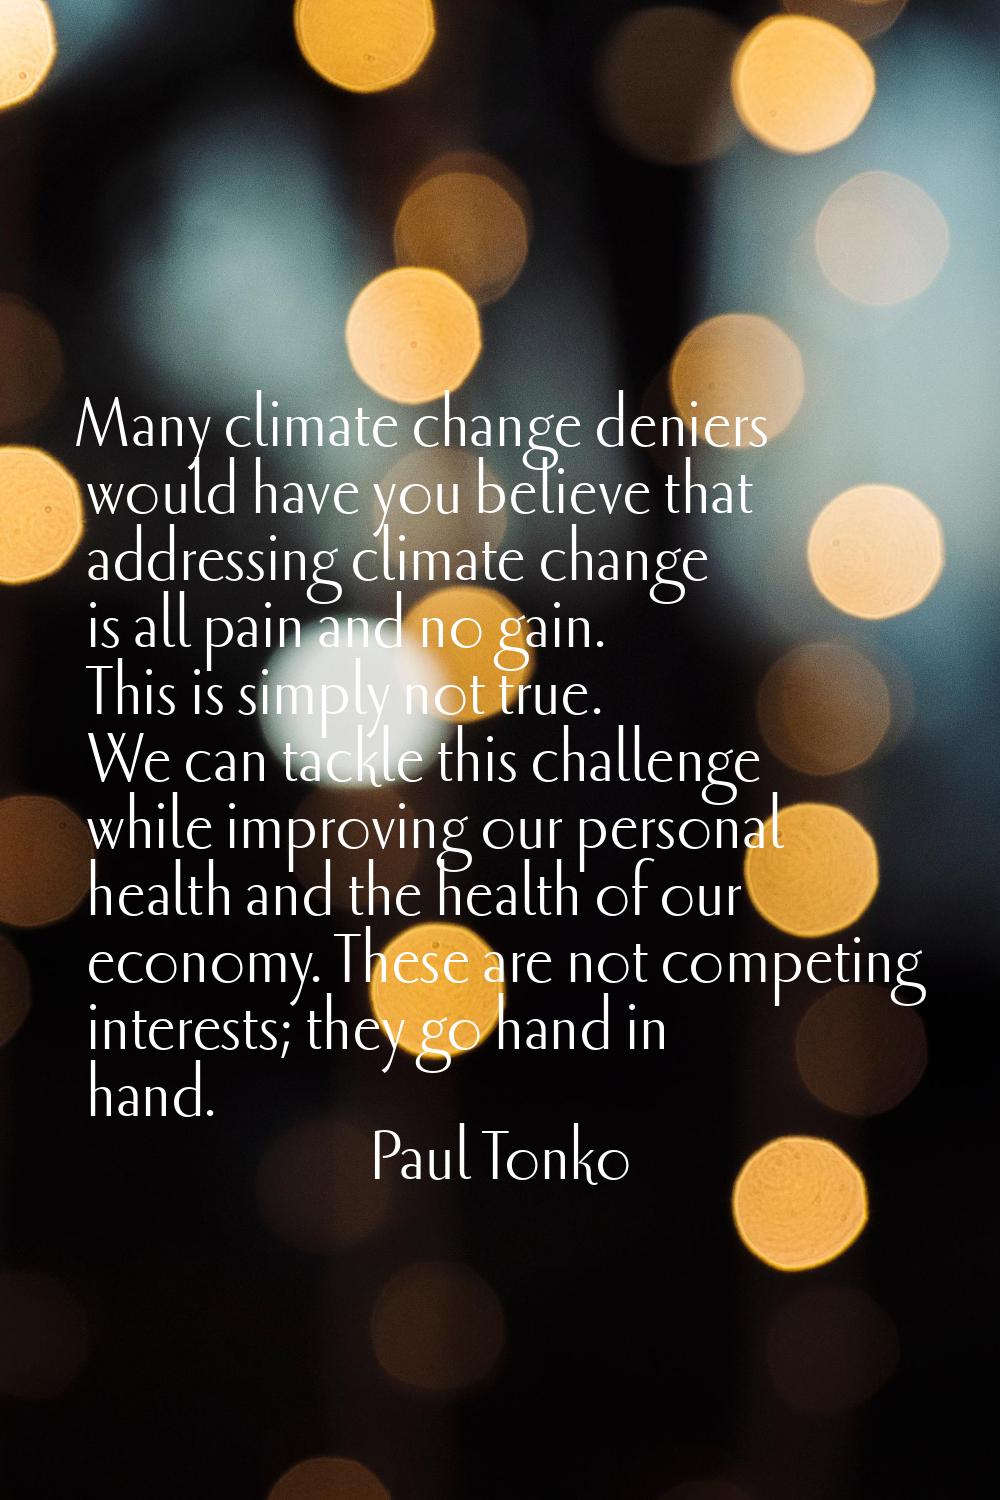 Many climate change deniers would have you believe that addressing climate change is all pain and n